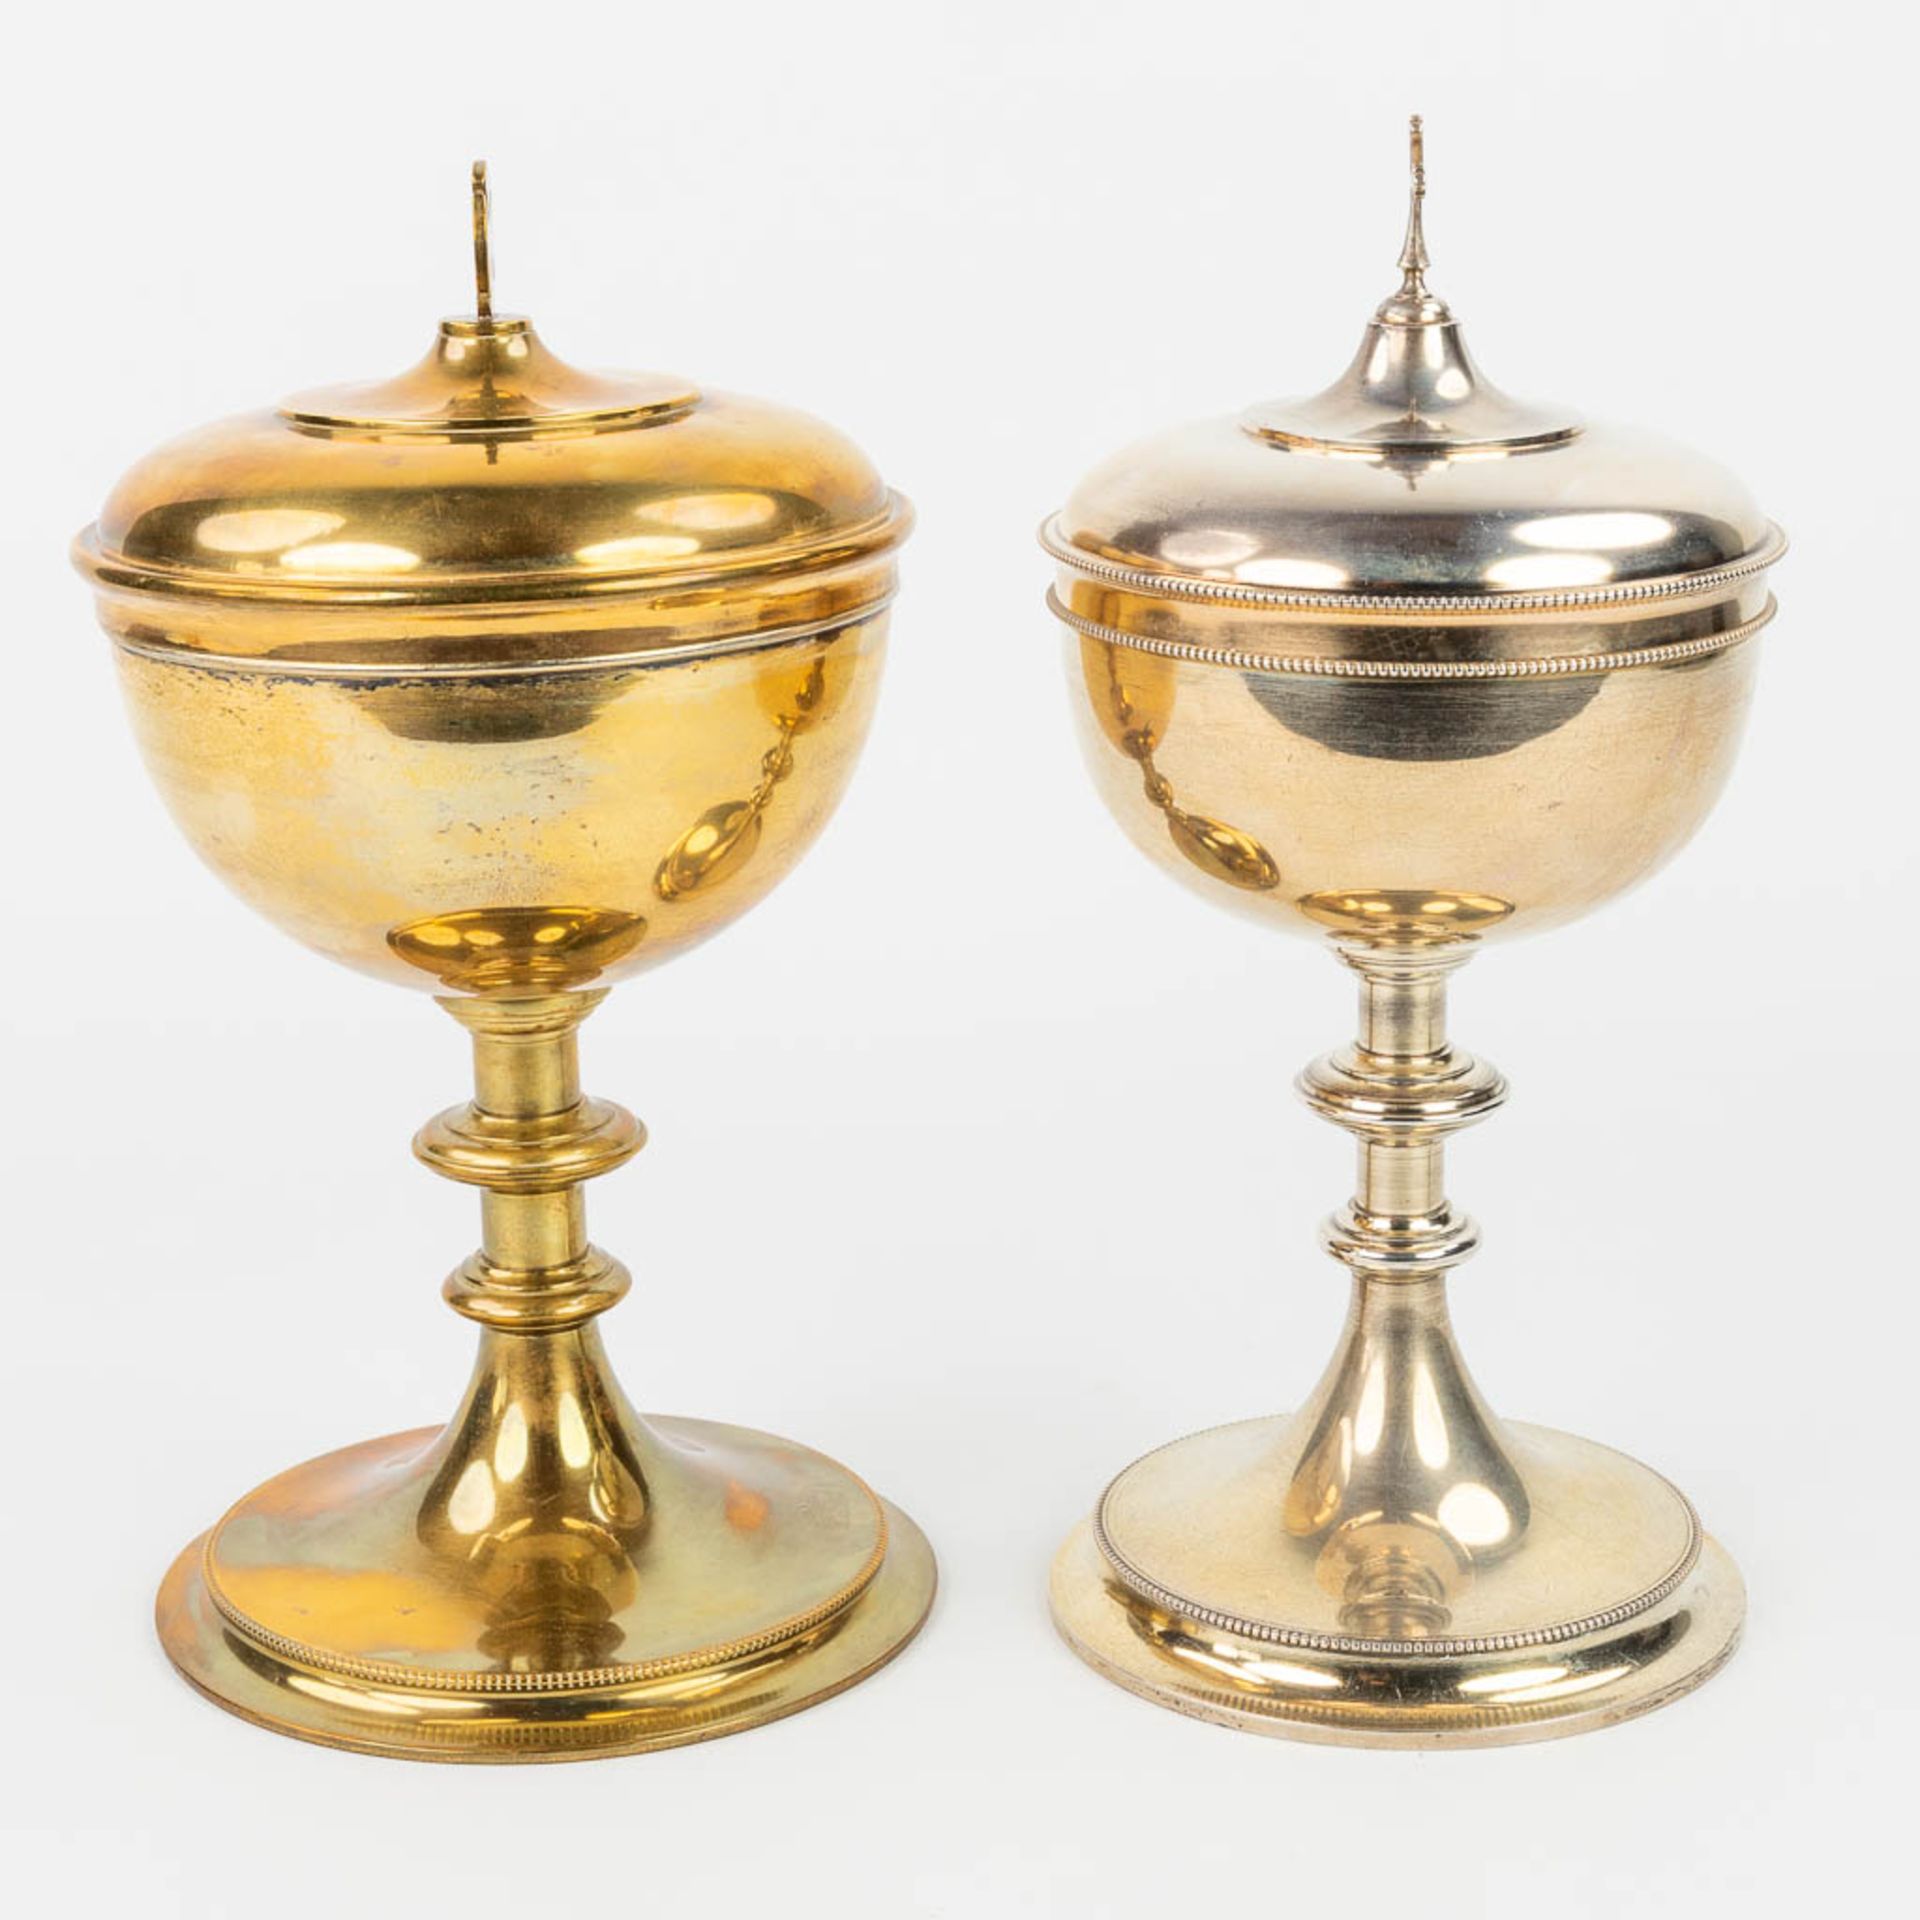 A collection of 4 large ciboria and a chalice made of silver and gold plated metal. - Image 4 of 24